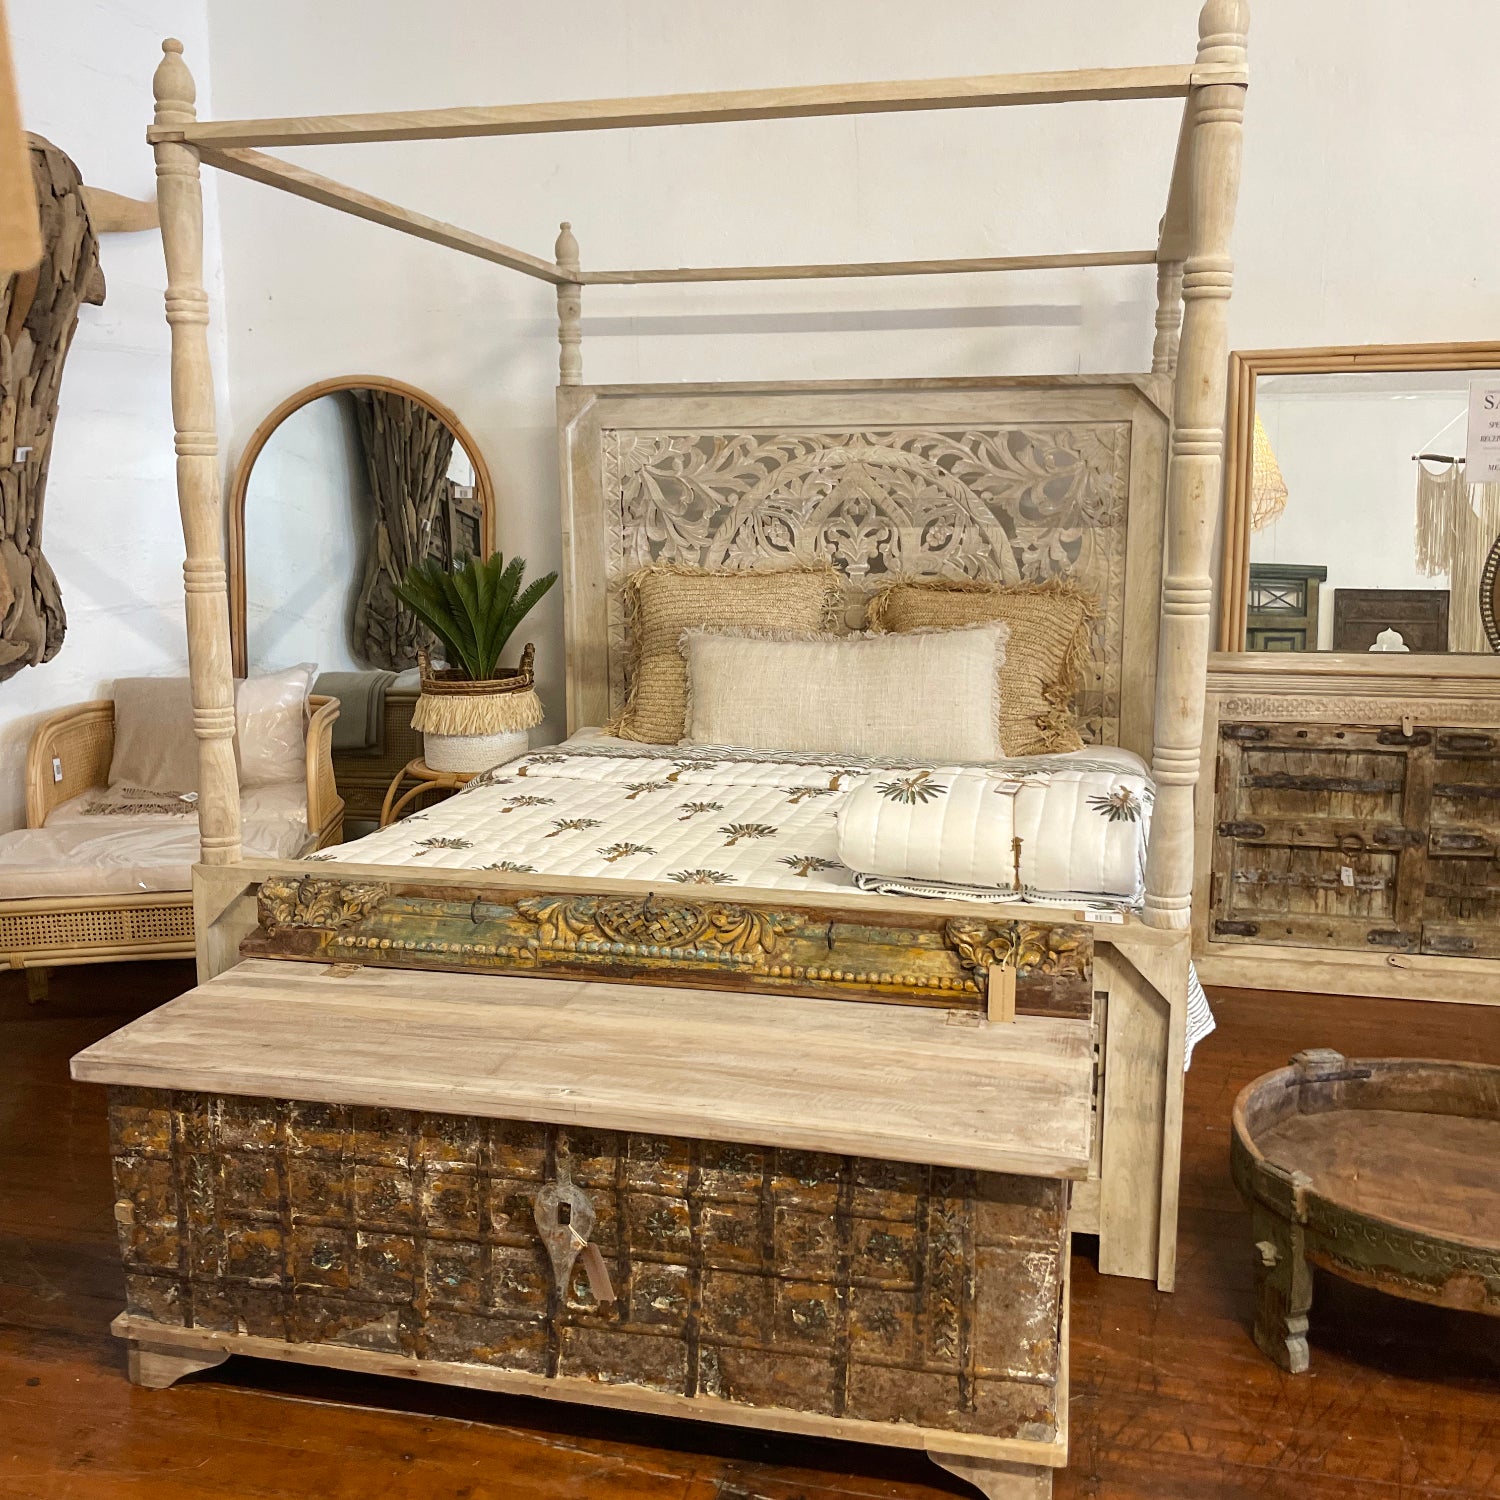 Indian Carved Wooden 4 Poster Bed - Queen